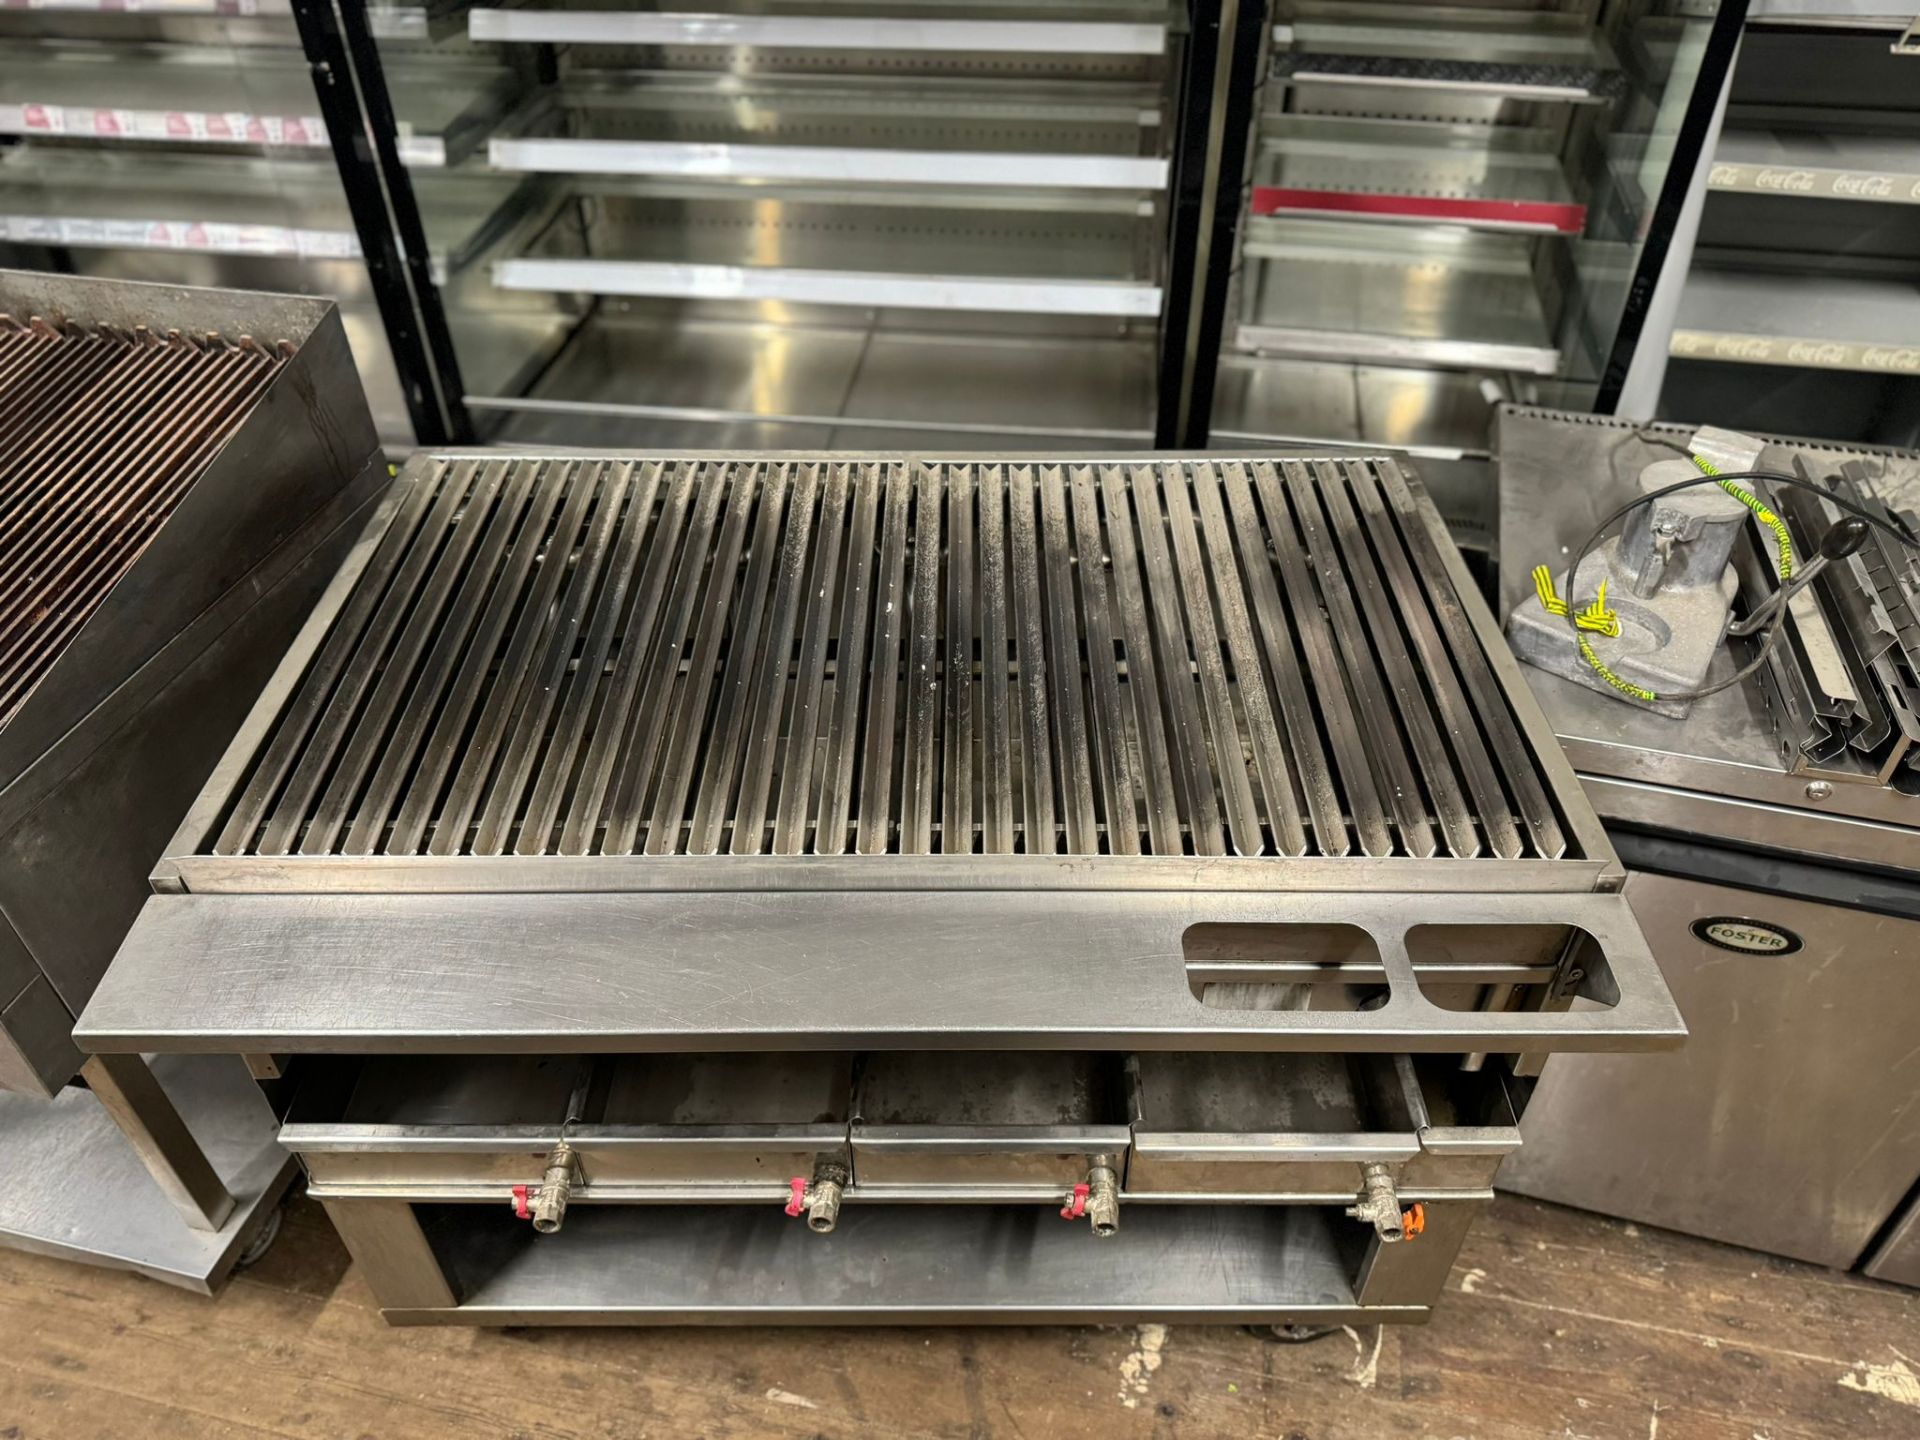 KSF CHARGRILL WITH WATER TRAY UNDER - 120 CM W - 5 BURNER NATURAL GAS BROILER  - Image 4 of 6